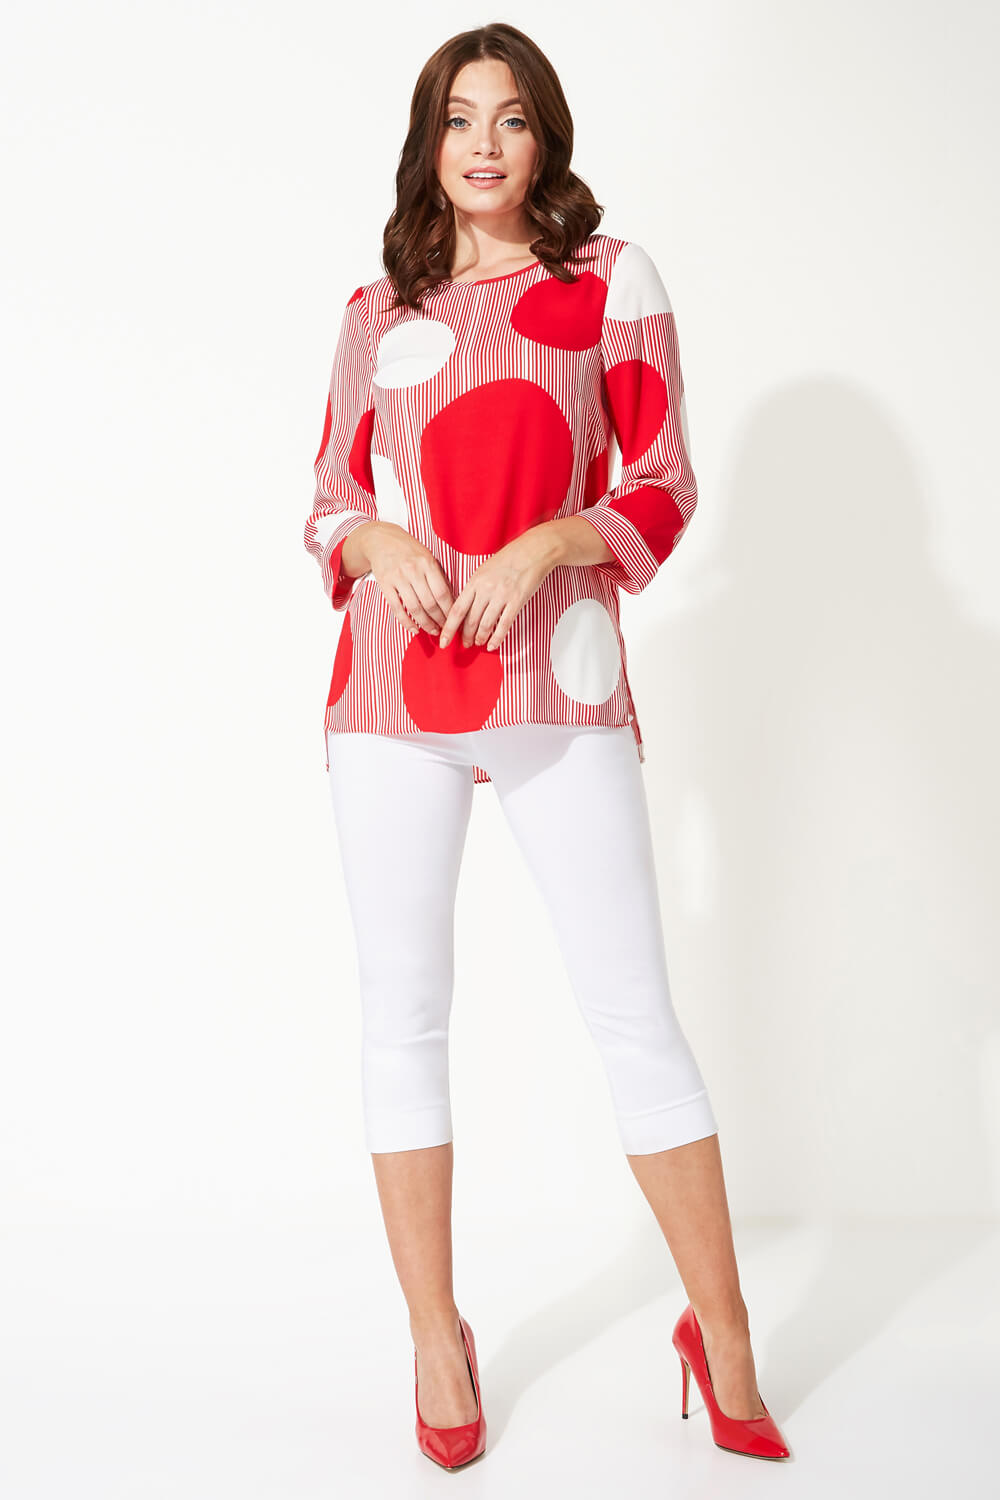 Red Spot Print 3/4 Sleeve Top, Image 2 of 8